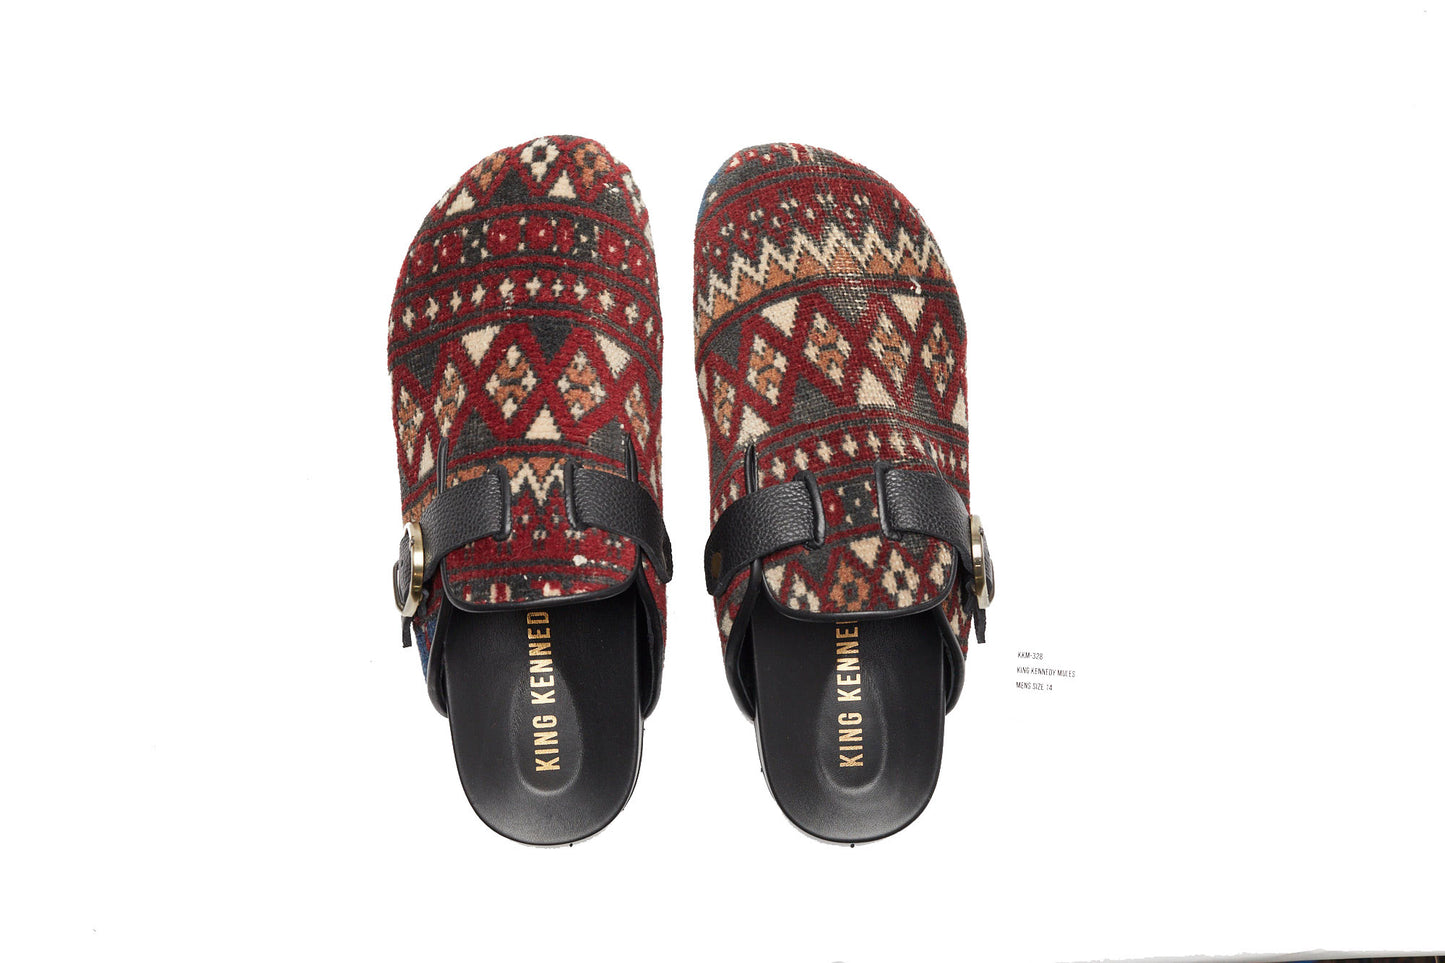 King Kennedy Rug Mules are one-of-a-kind and made of 100 year old antique Persian rug fragments with soft lambskin footbed and comfortable rubber sole. This pair is made of an antique Persian rug with vibrant deep red, cream, tan and dark grey patterns throughout.